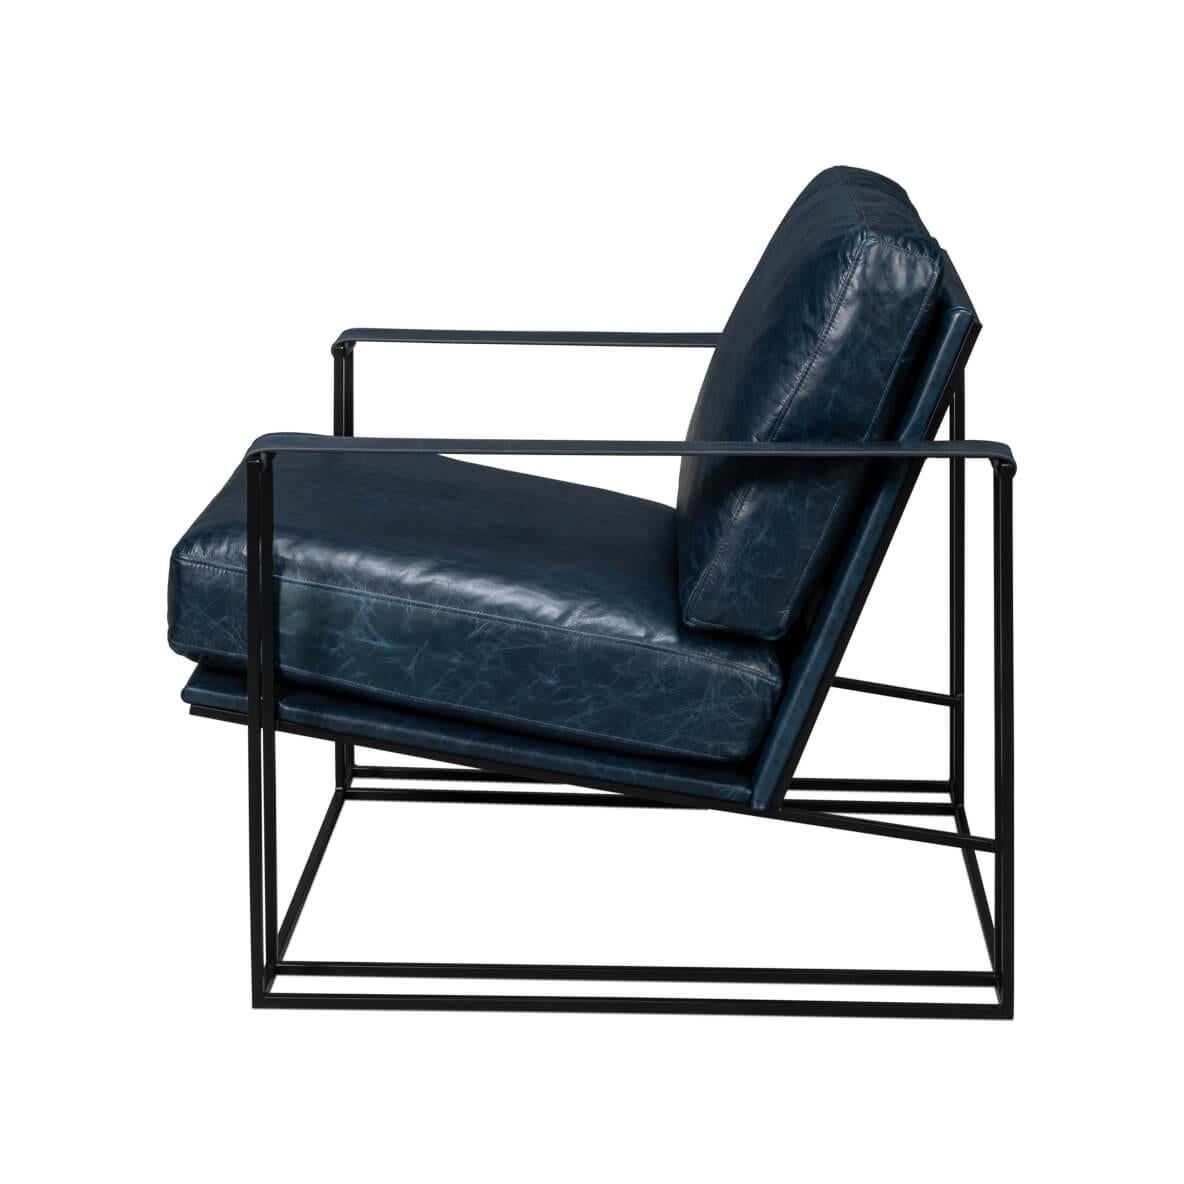 Upholstered in top-grade Chateau Blue leather, this chair is a statement piece that adds a modern touch to any space. Its unique double iron frame not only provides robust support but also contributes to its sleek and stylish look.

With dimensions